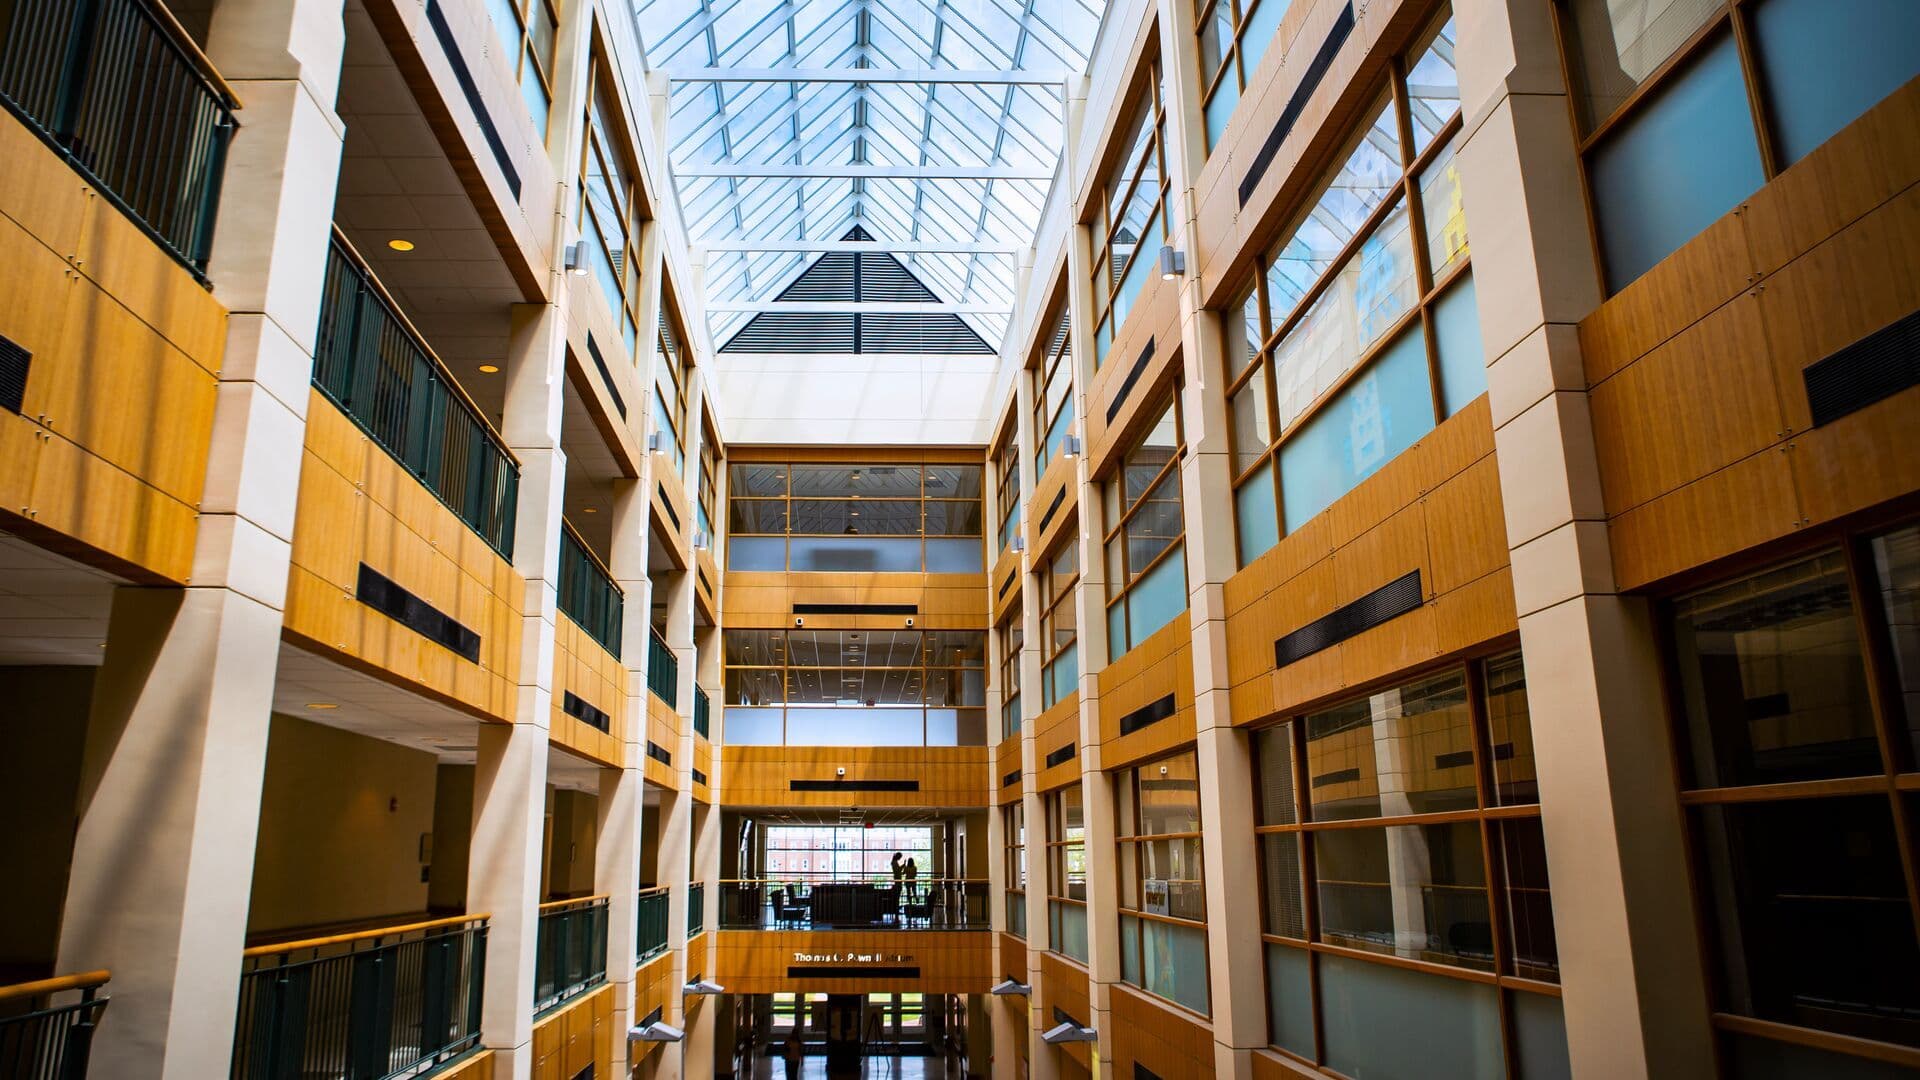 View of the interior atrium area of Van Munching Hall, view of the interior hallways and student silhouettes in the background.